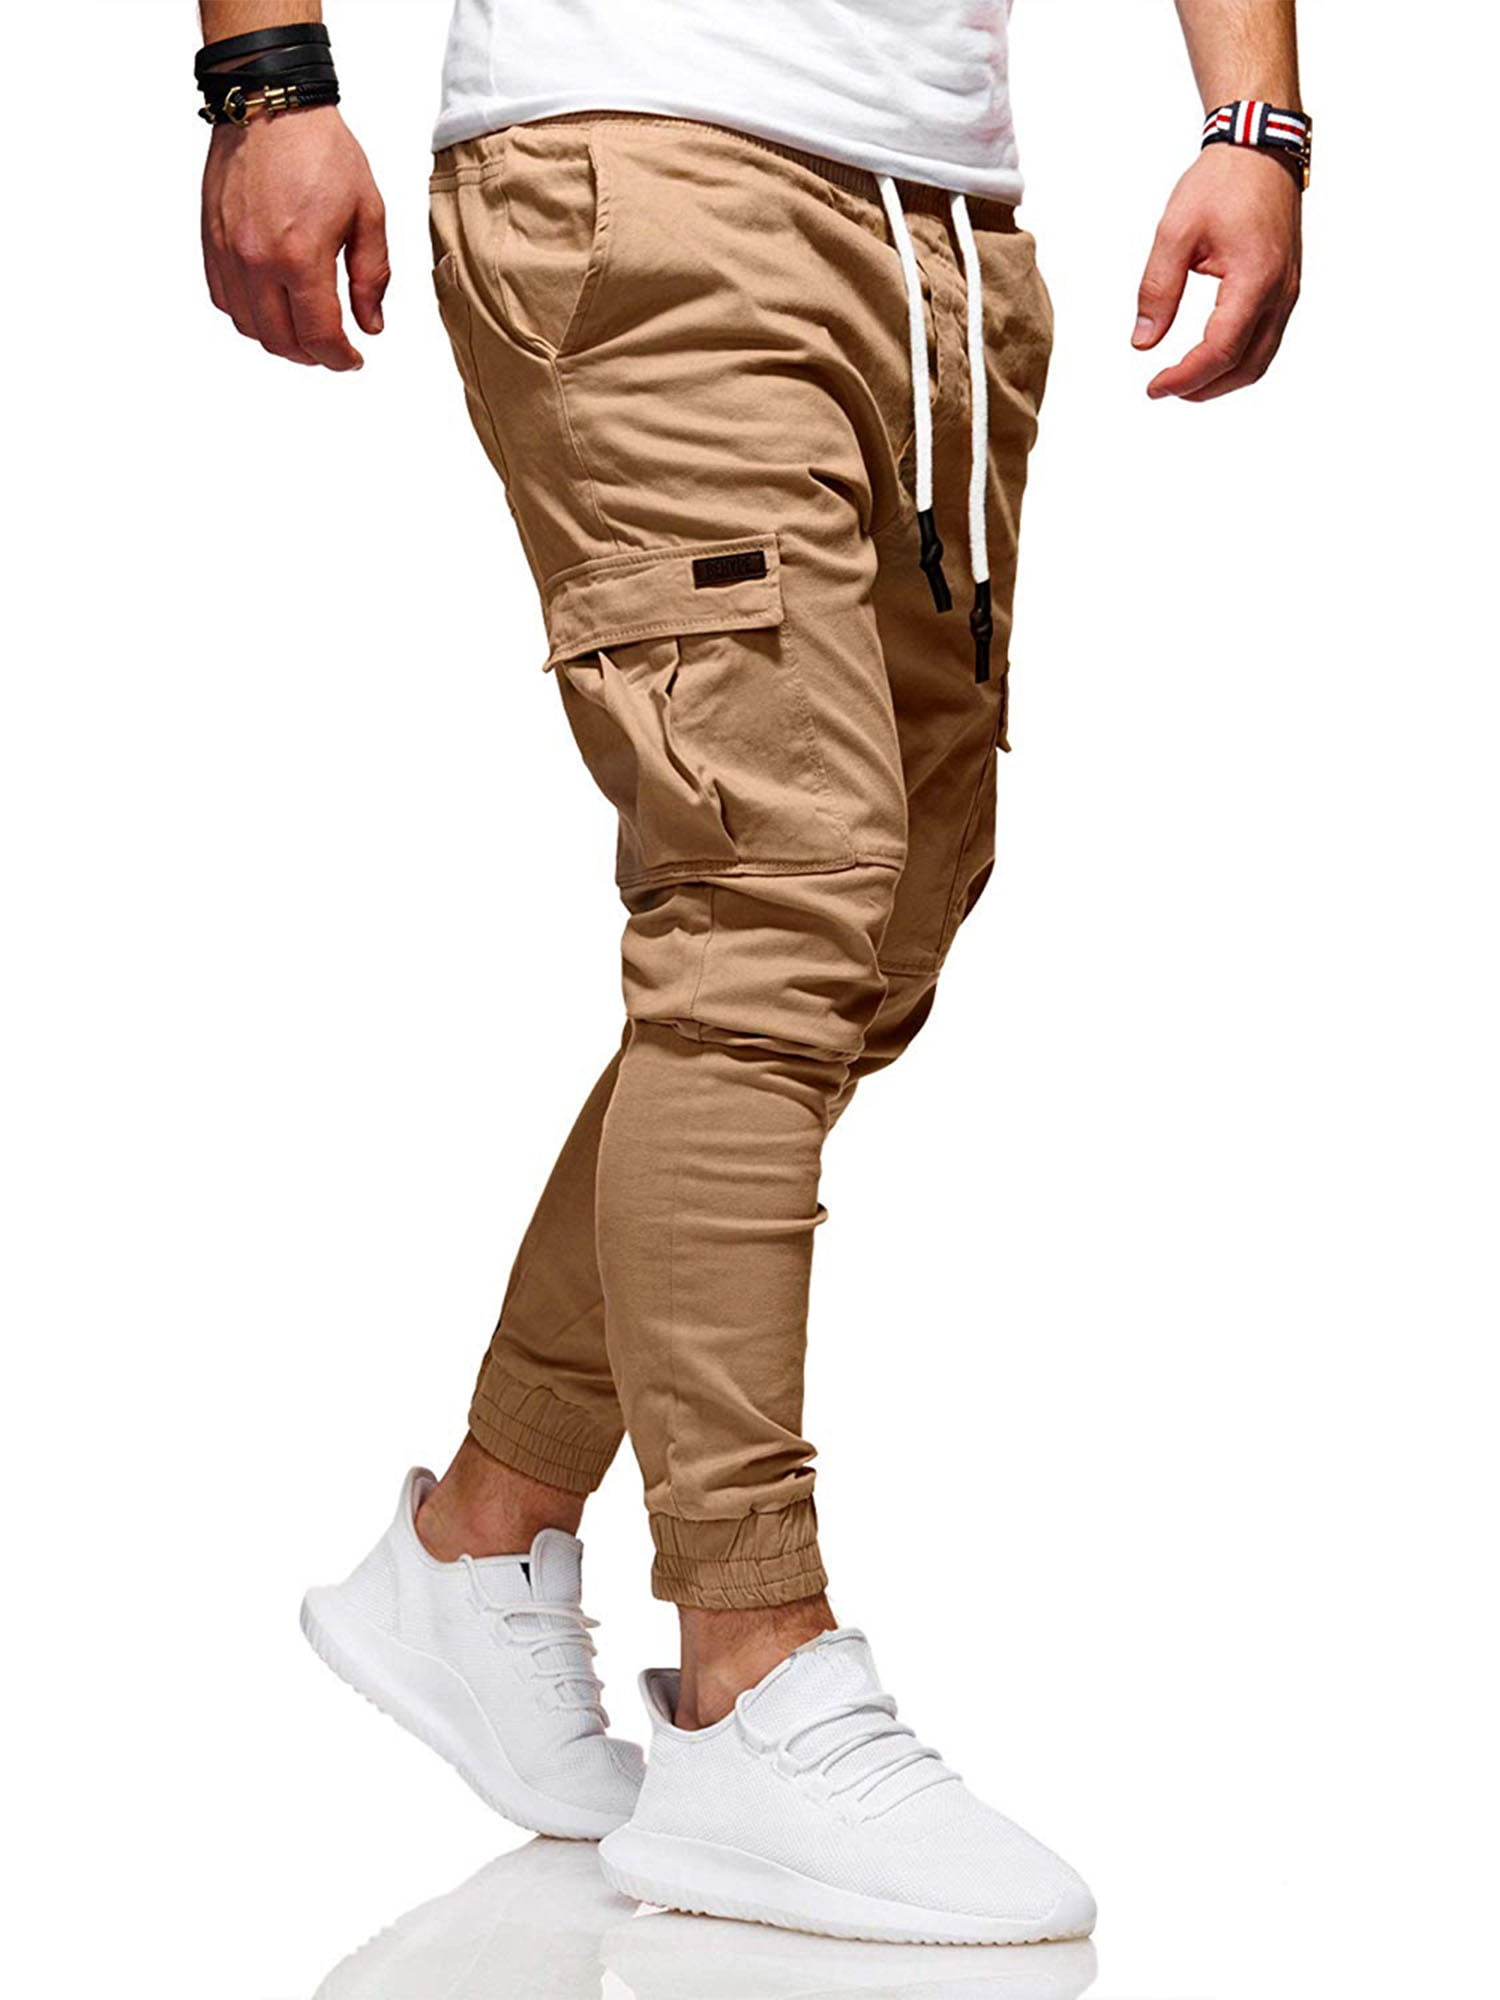 M&S&W Mens Loose Fit Cargo Pants Tactical Outdoors Multi Pocket Trousers